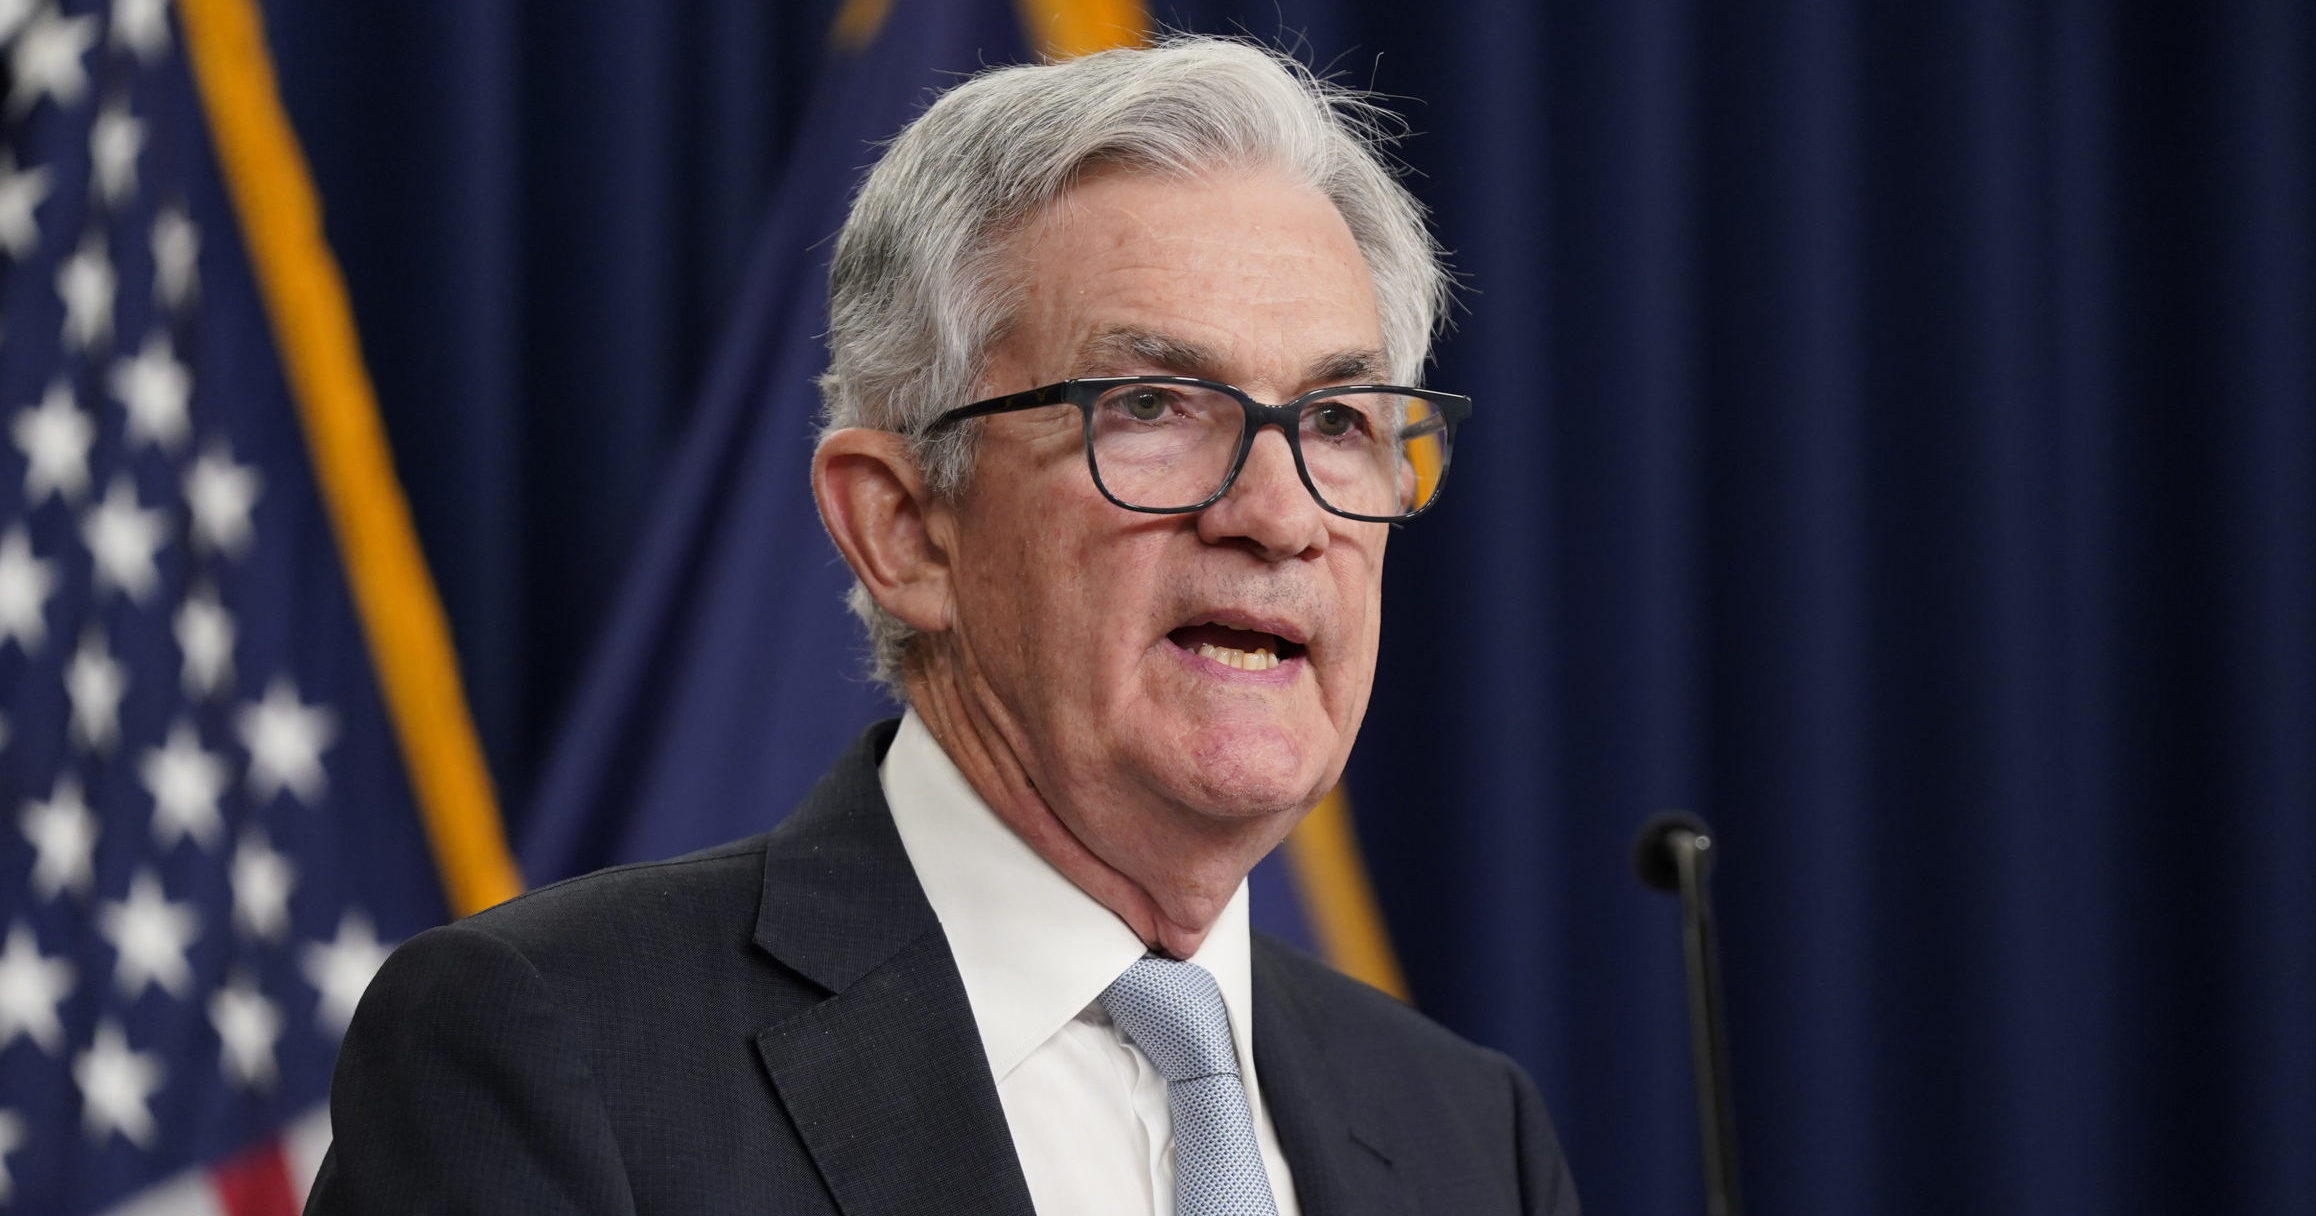 Federal Reserve Chairman Jerome Powell speaks at a news conference following a Federal Open Market Committee meeting in Washington on Nov. 2.